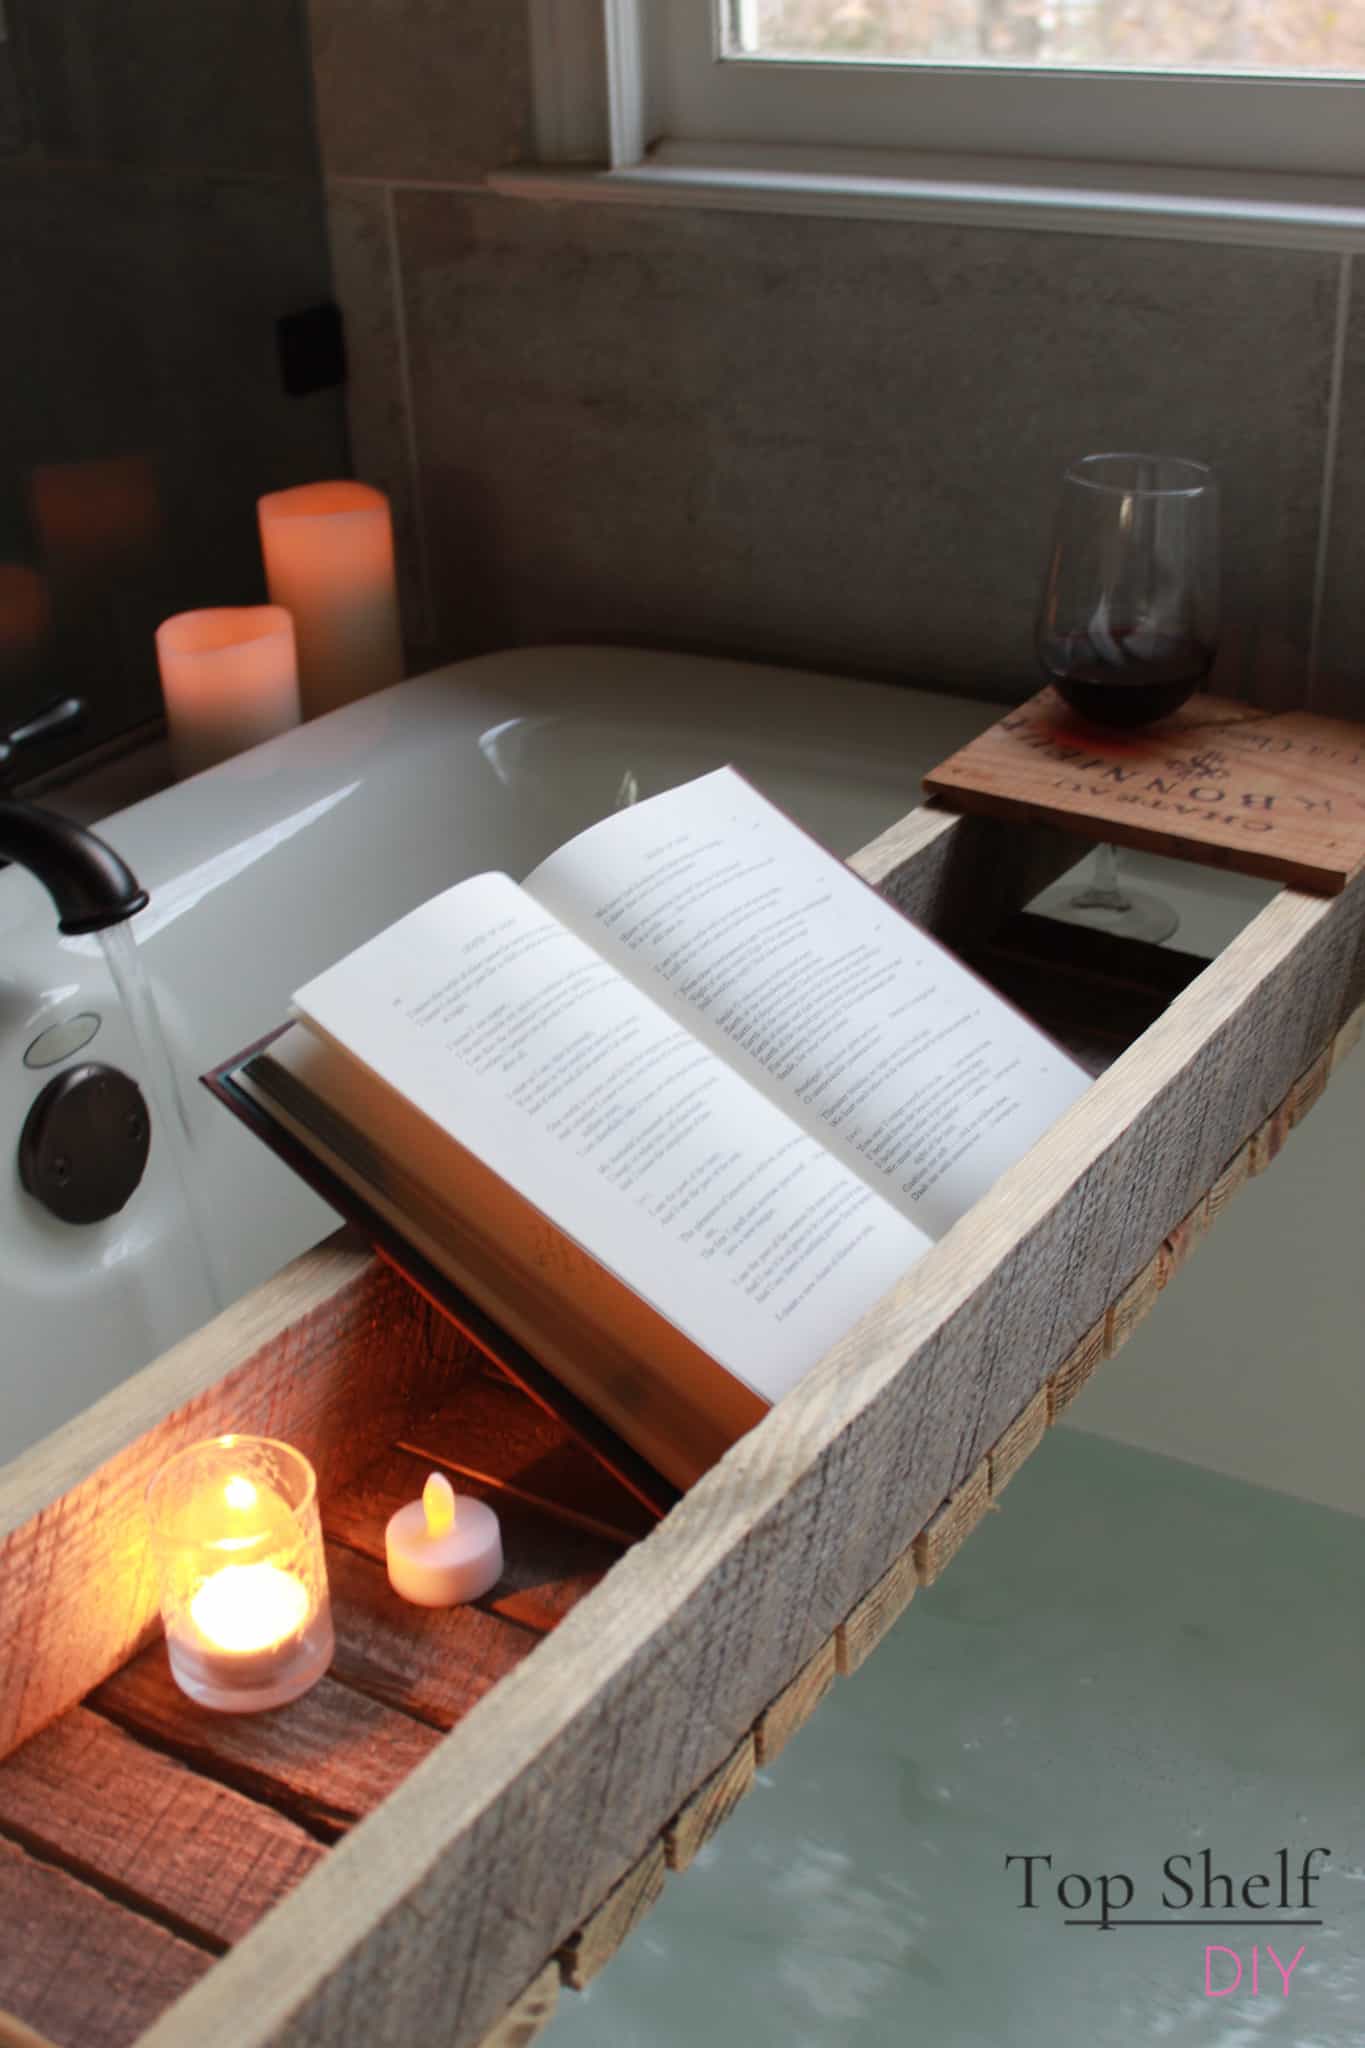 Kick your nighttime relaxation up a notch with this DIY bathtub shelf made from reclaimed lumber. Holds your wine and a good book!